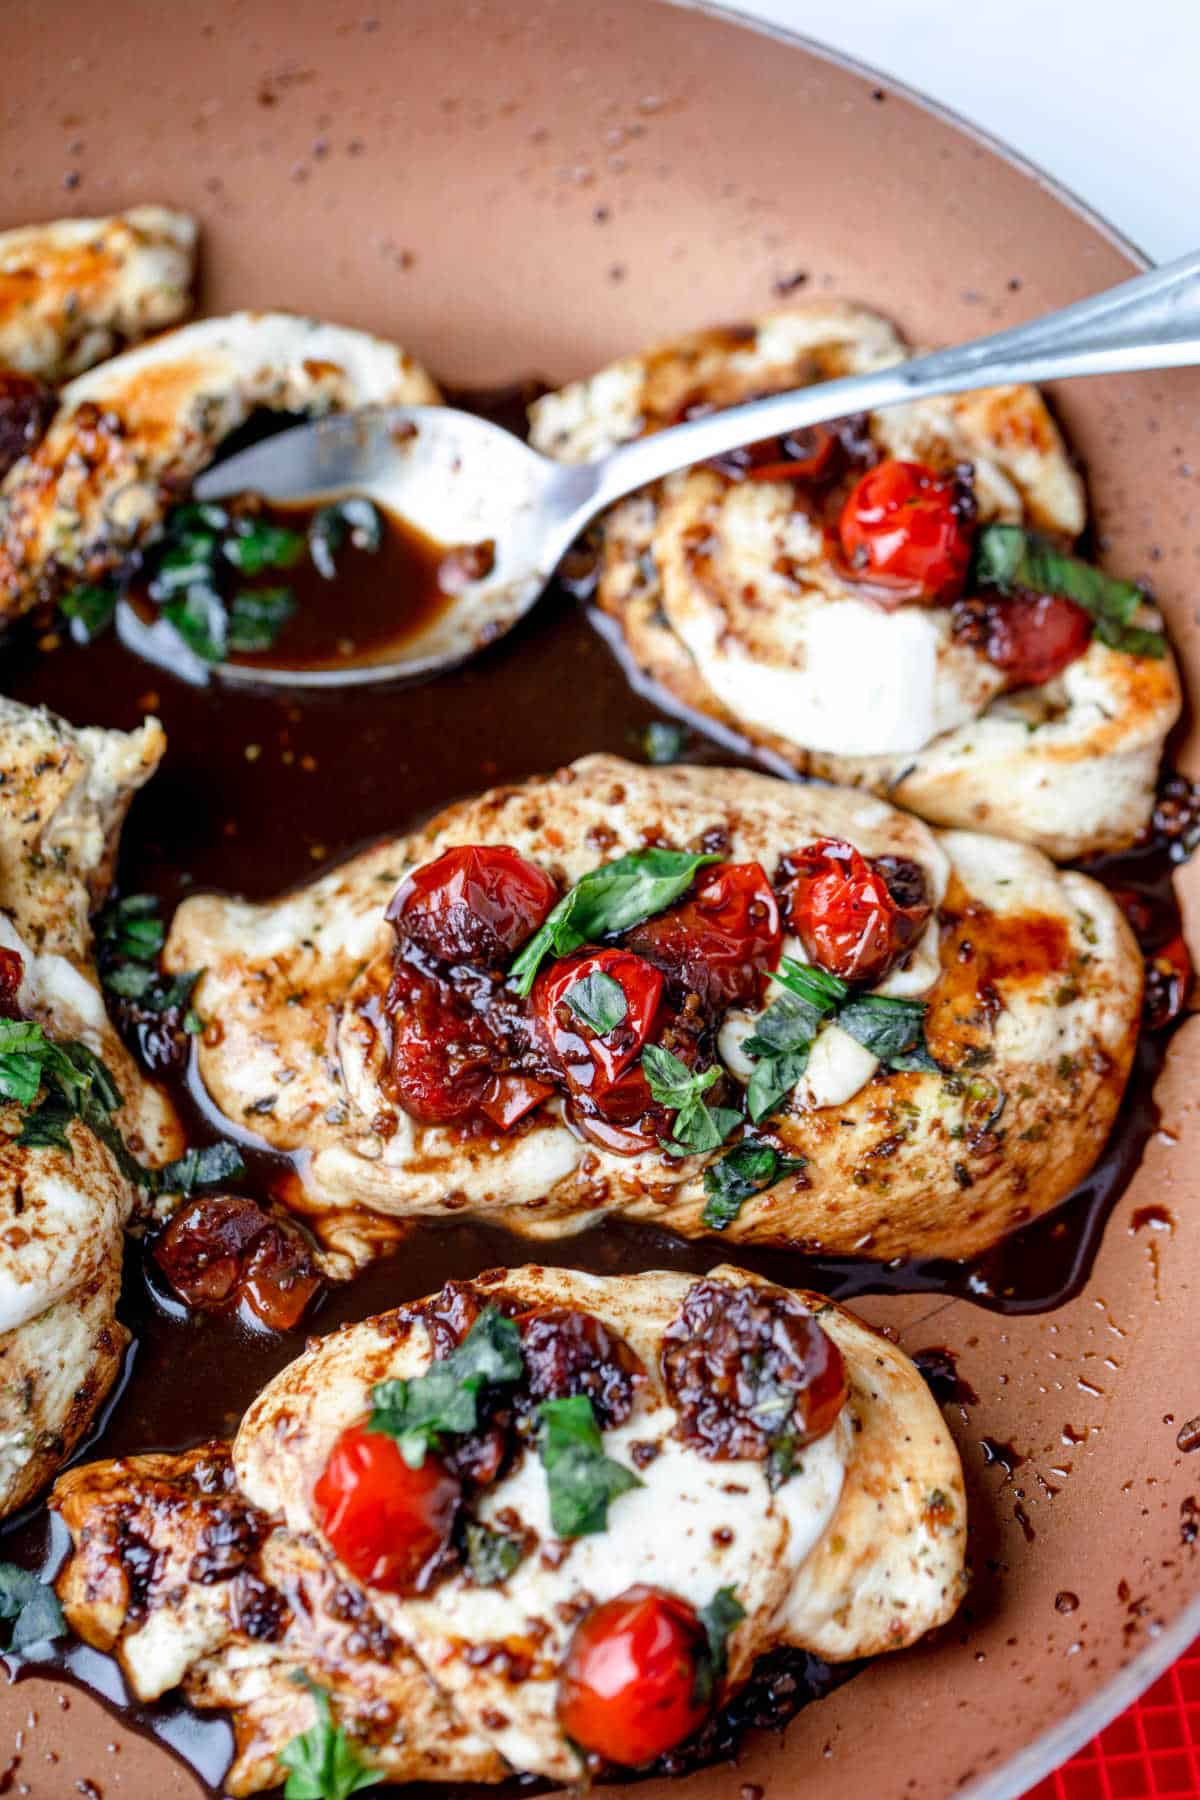 A spoon holding balsamic glaze next to caprese chicken.